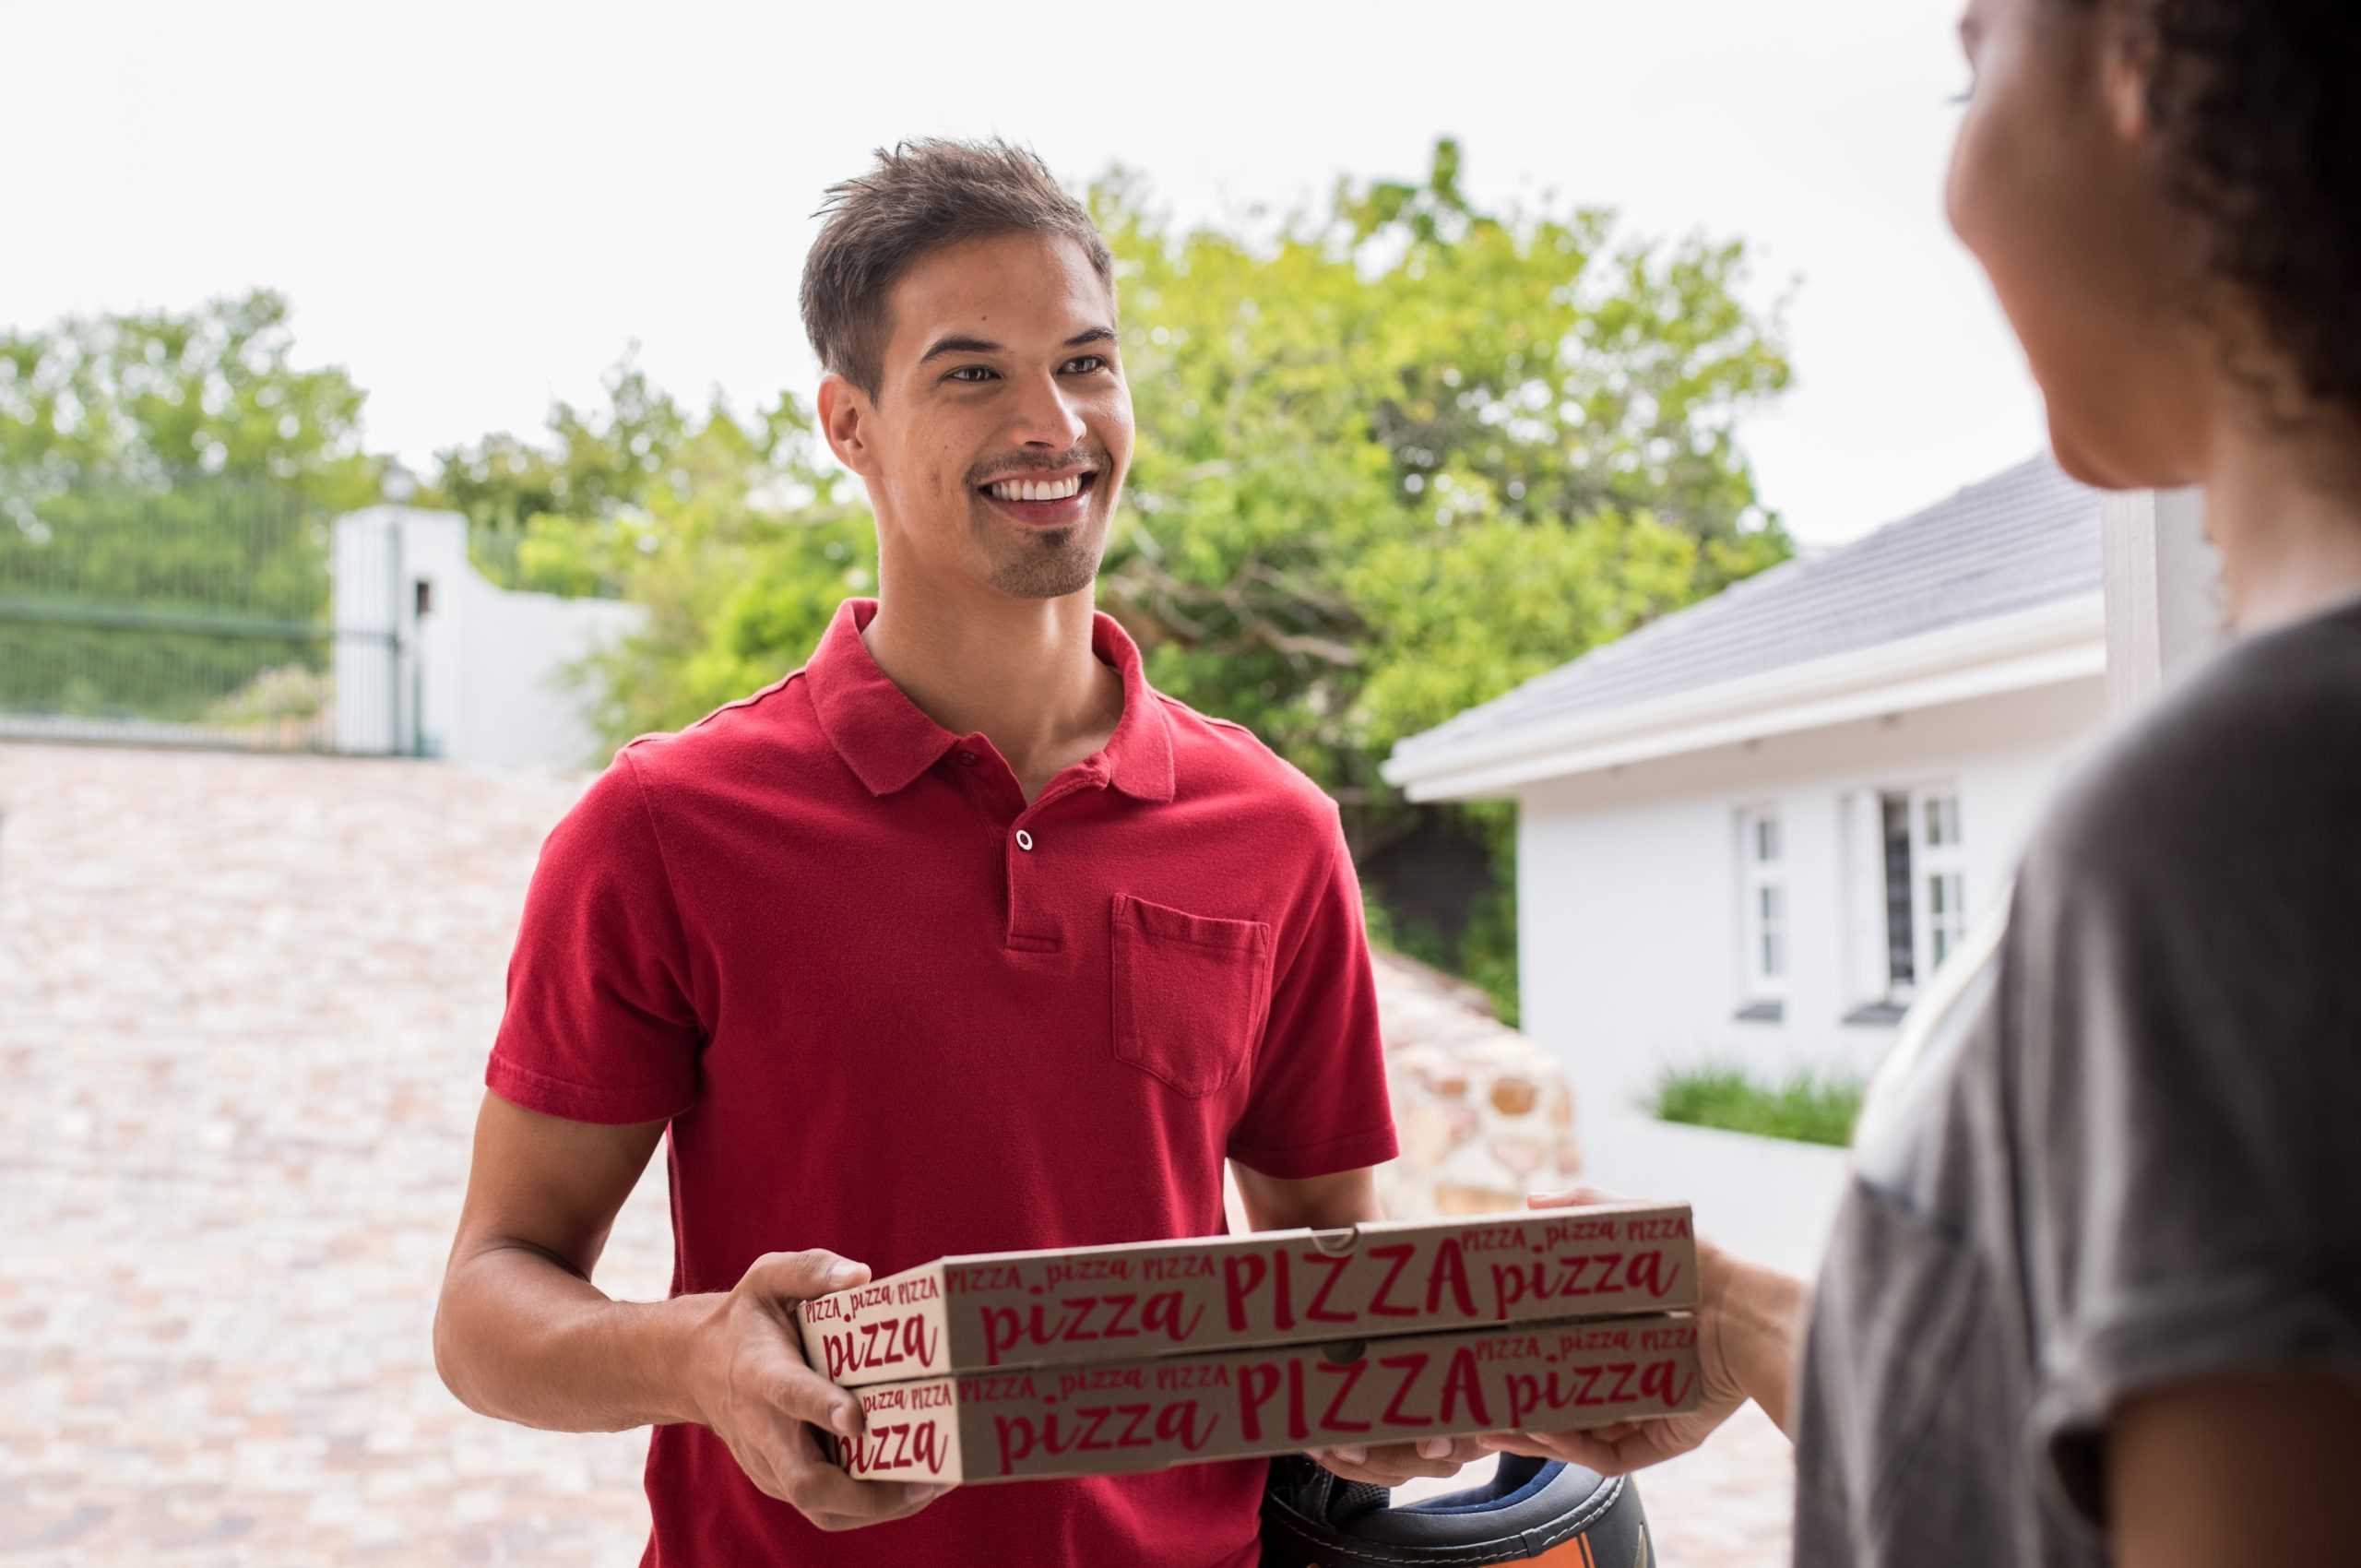 Smiling delivery boy in red t-shirt delivering two pizza boxes to woman. Happy young delivery man giving pizza to customer on the doorstep. Smiling woman receiving take away food from deliveryman.